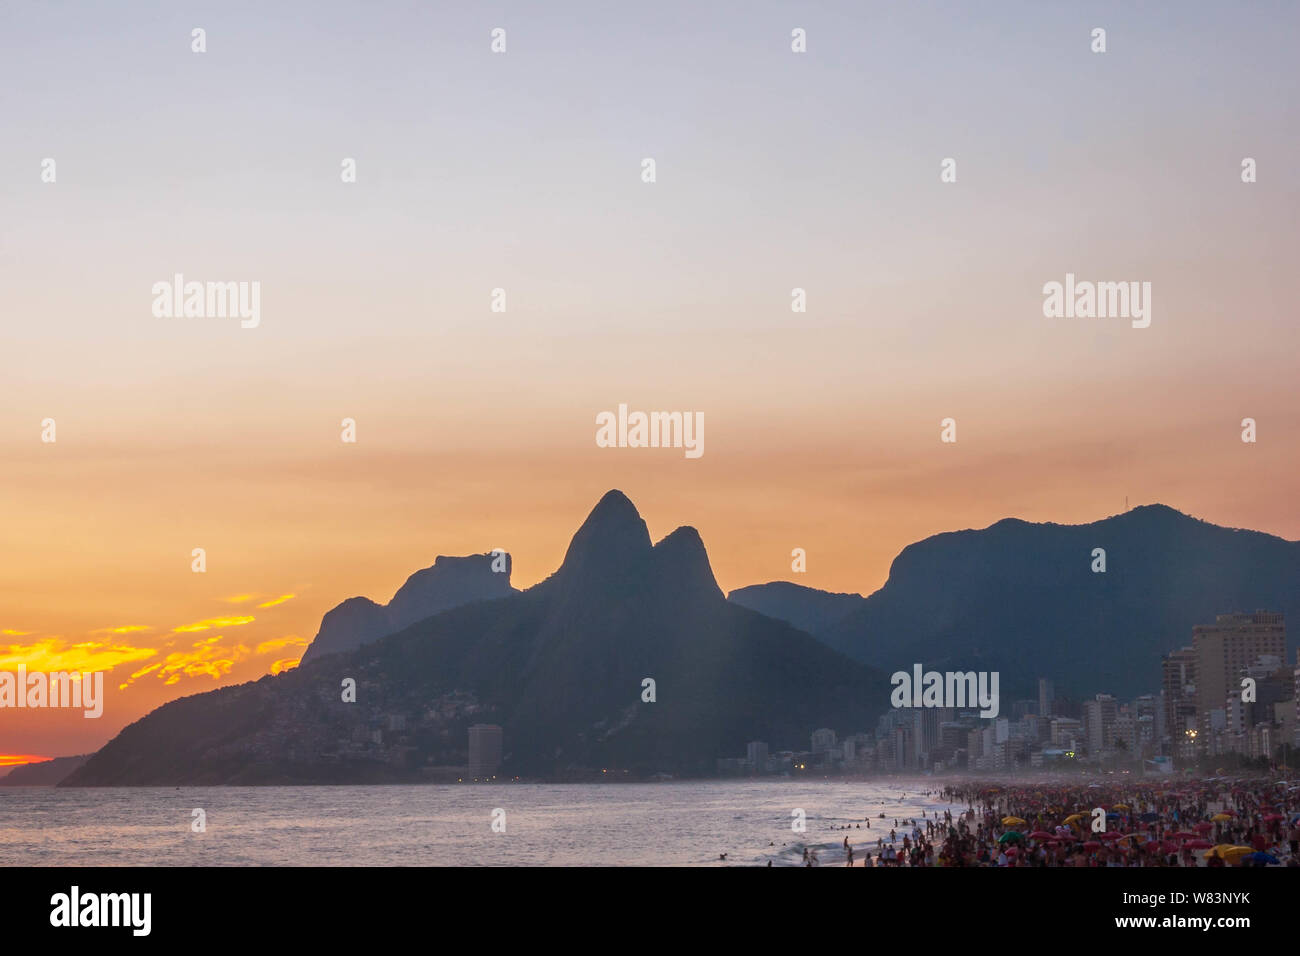 Amazing sunset at Rio de Janeiro litoral seen from Arpoador rock depicting Ipanema beach with a crowd on the sand and the silhouette of the mountains Stock Photo